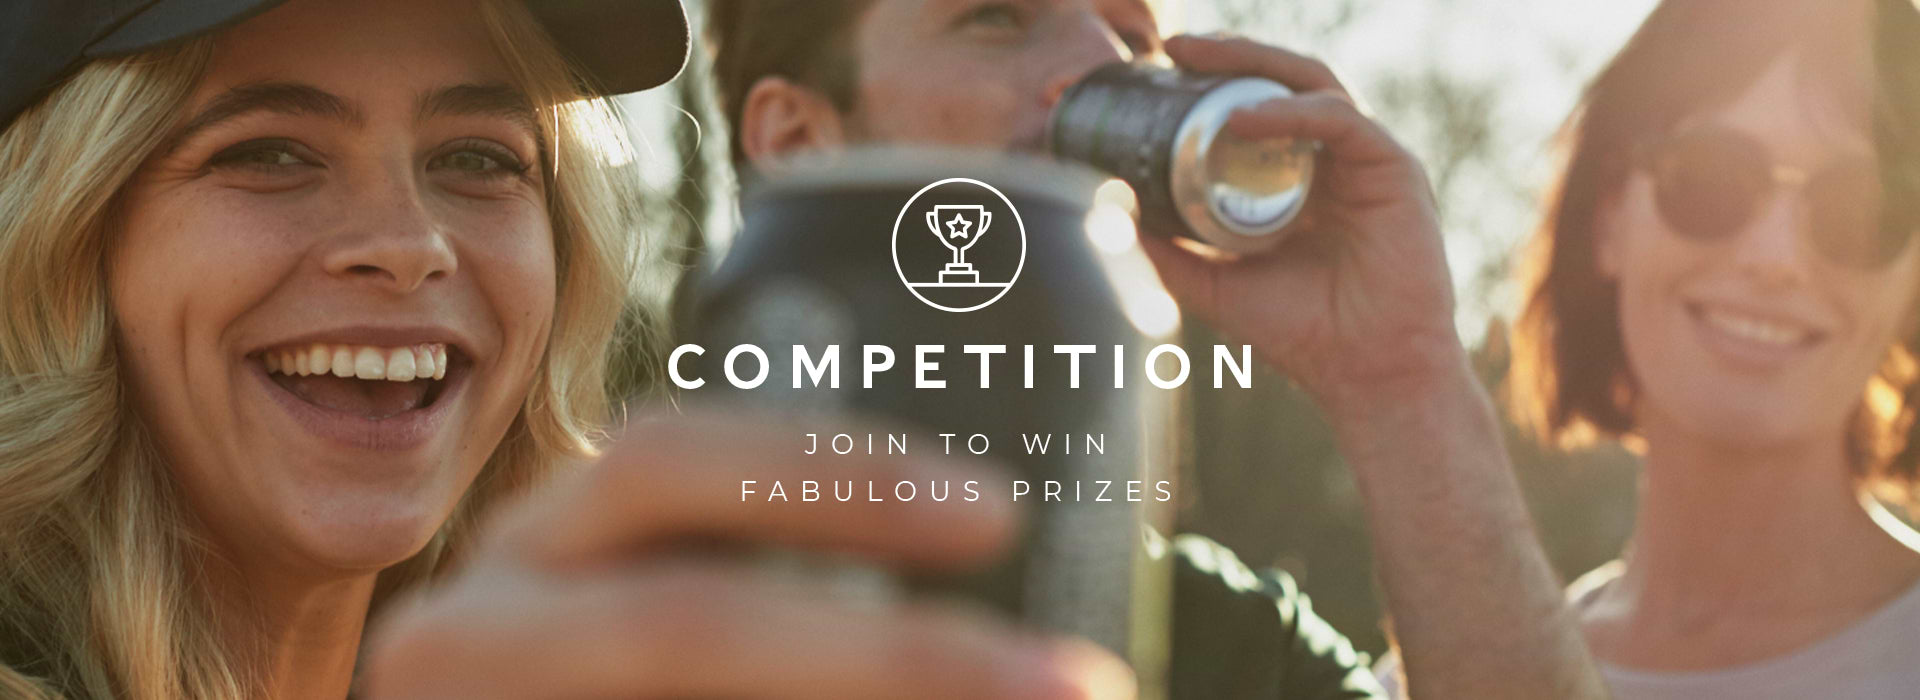 Competition. Join to win fabulous prizes